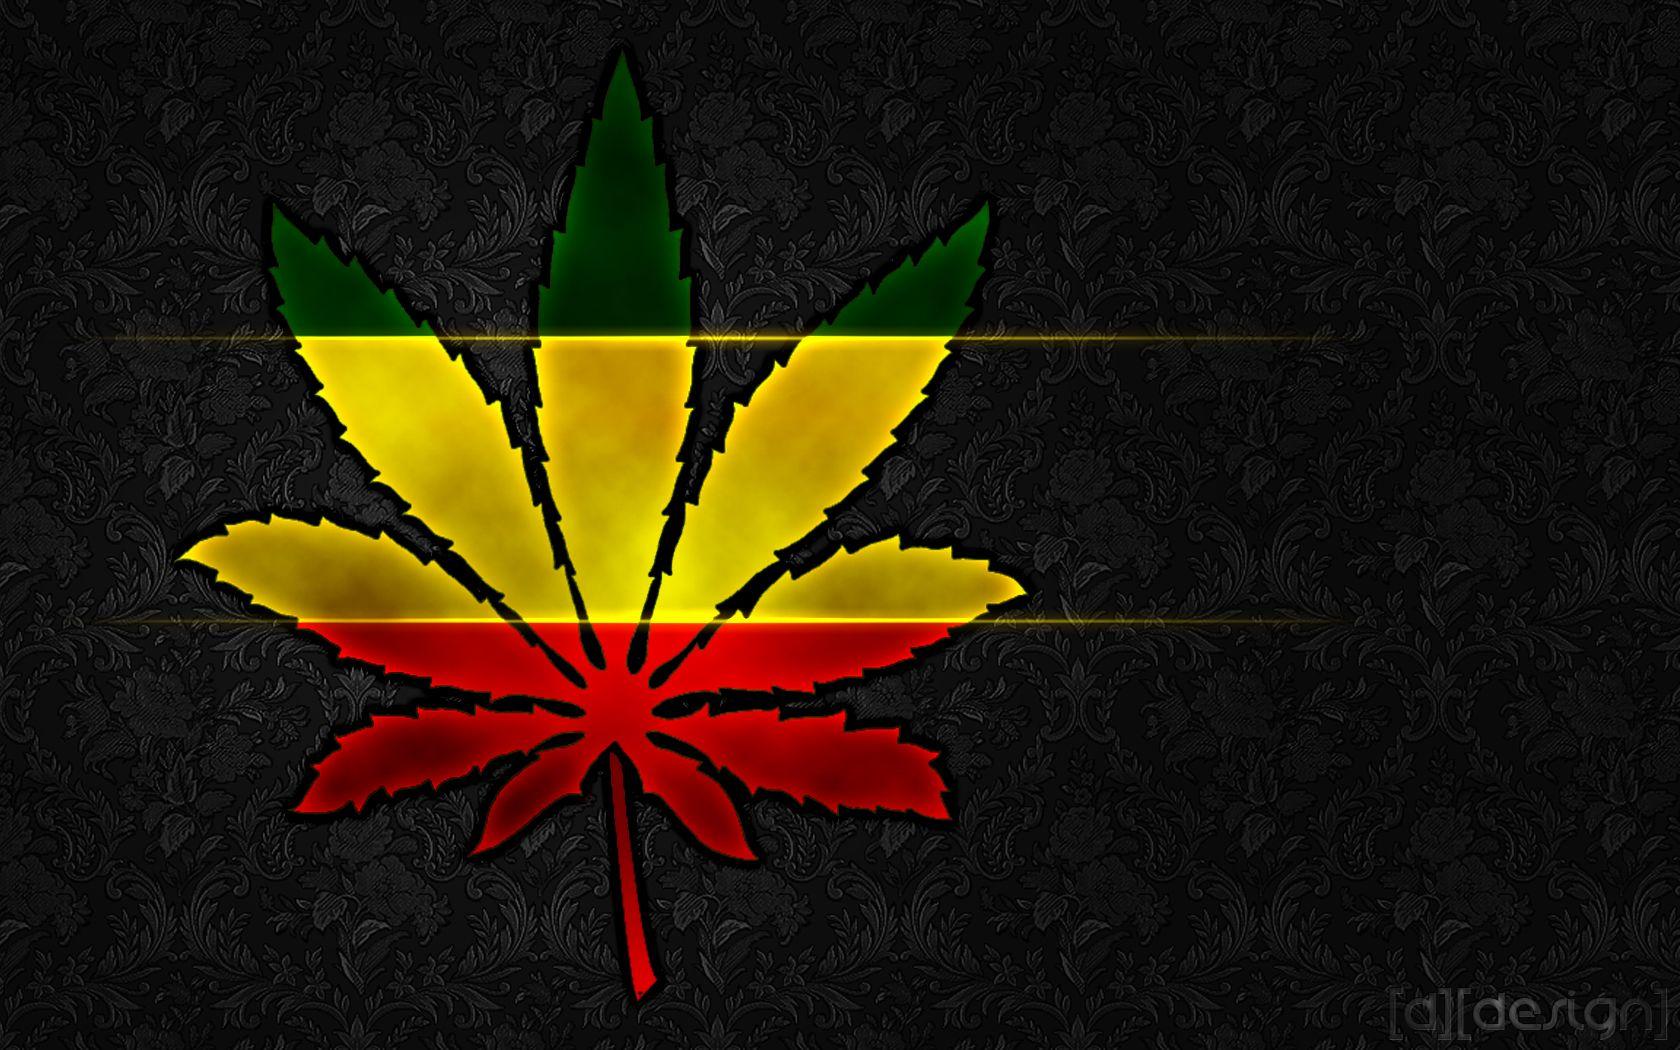 awesome wallpapers hd weed